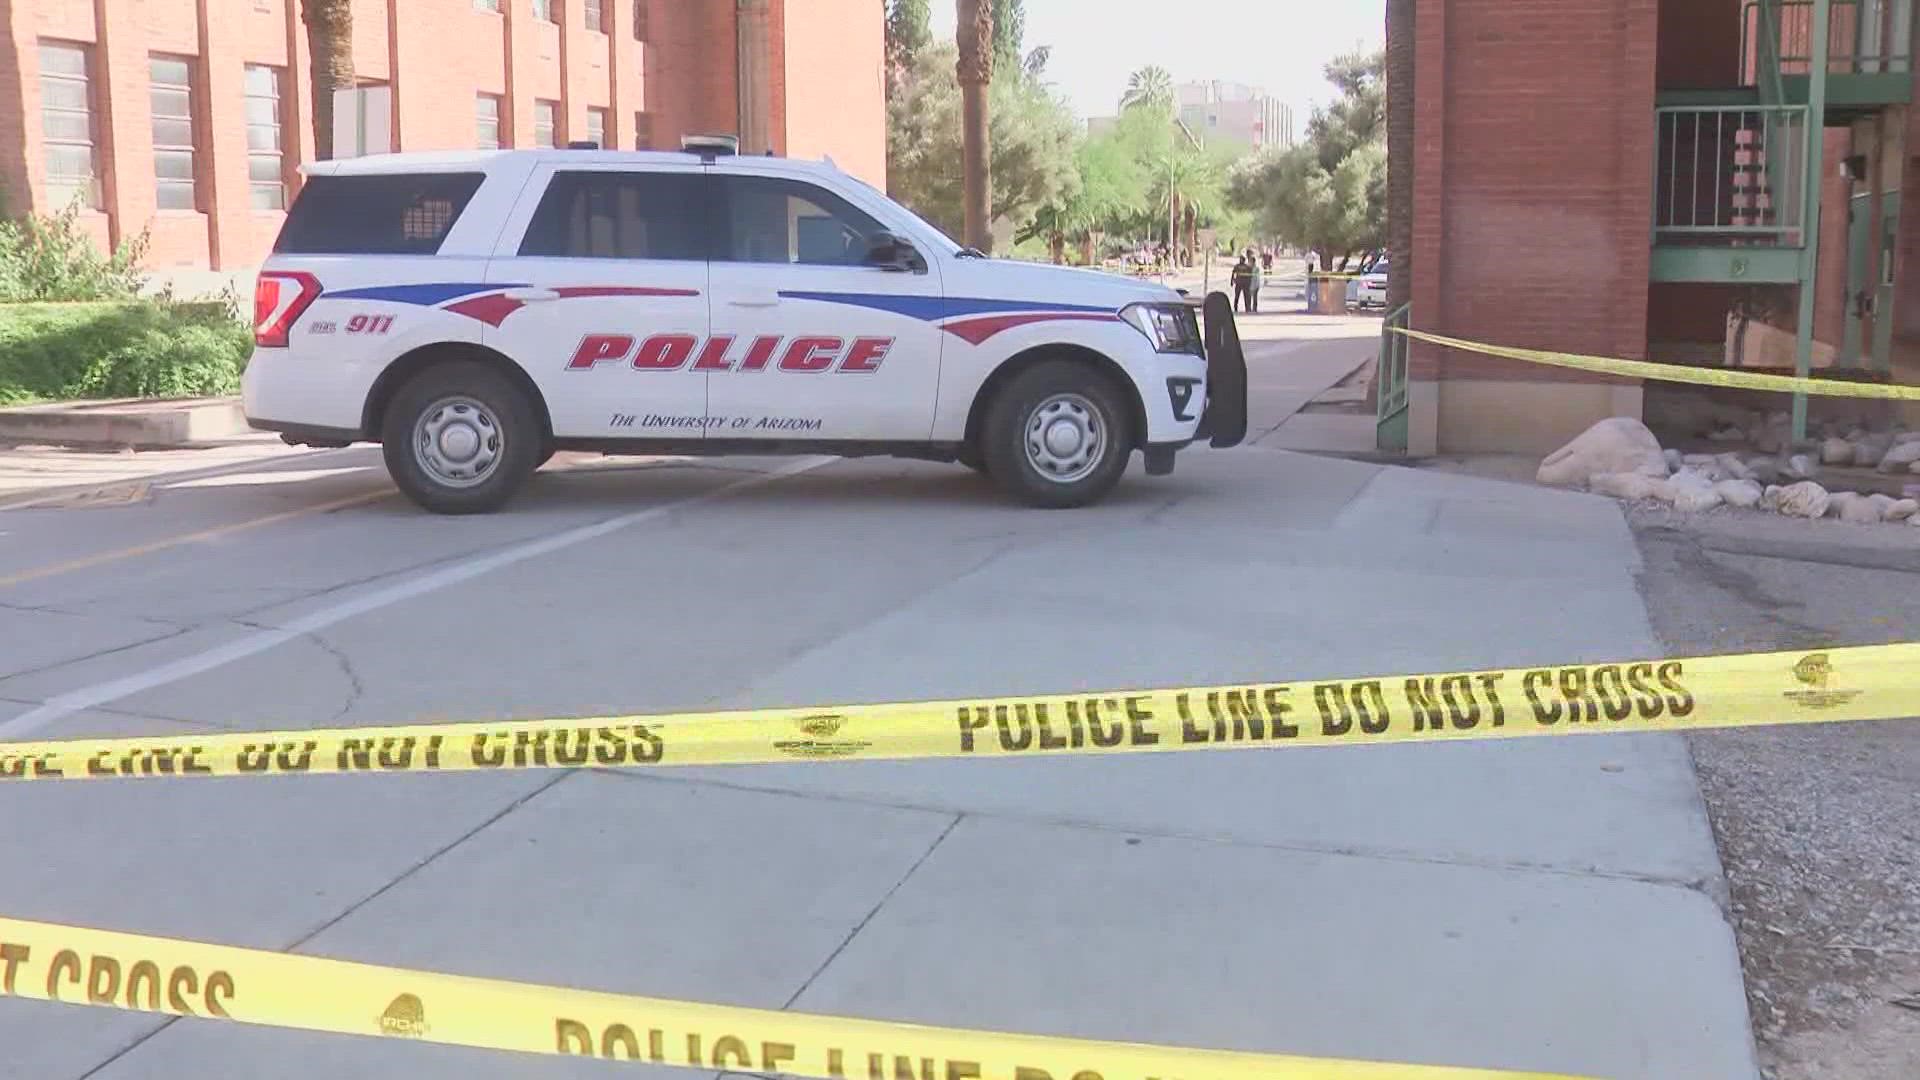 Students at Arizona State University are also concerned over on-campus safety after a former student shot and killed a professor at UArizona this week.